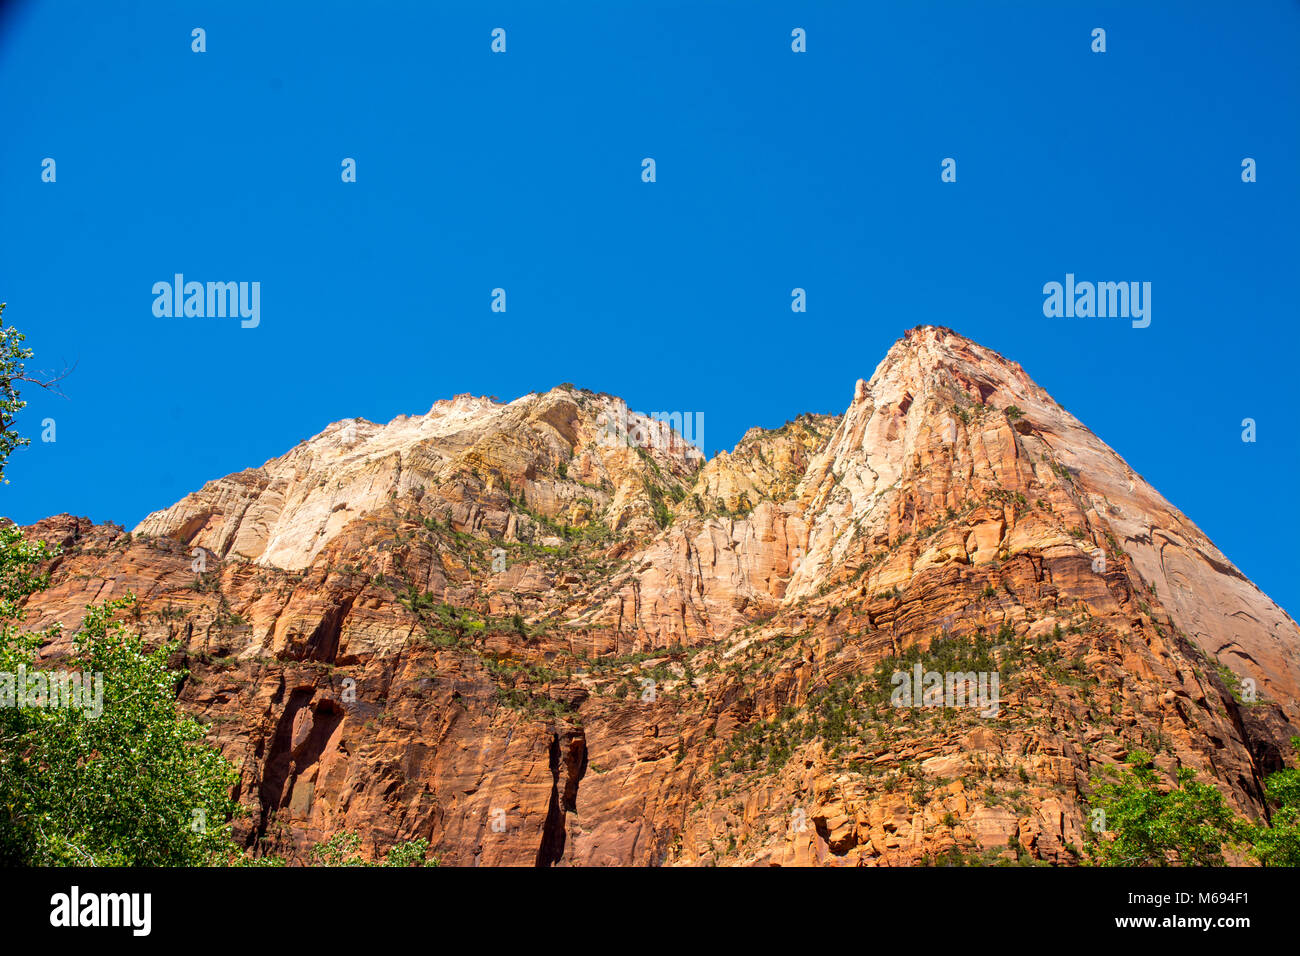 View of Peaks at top of cliffs at Zion National Park Stock Photo